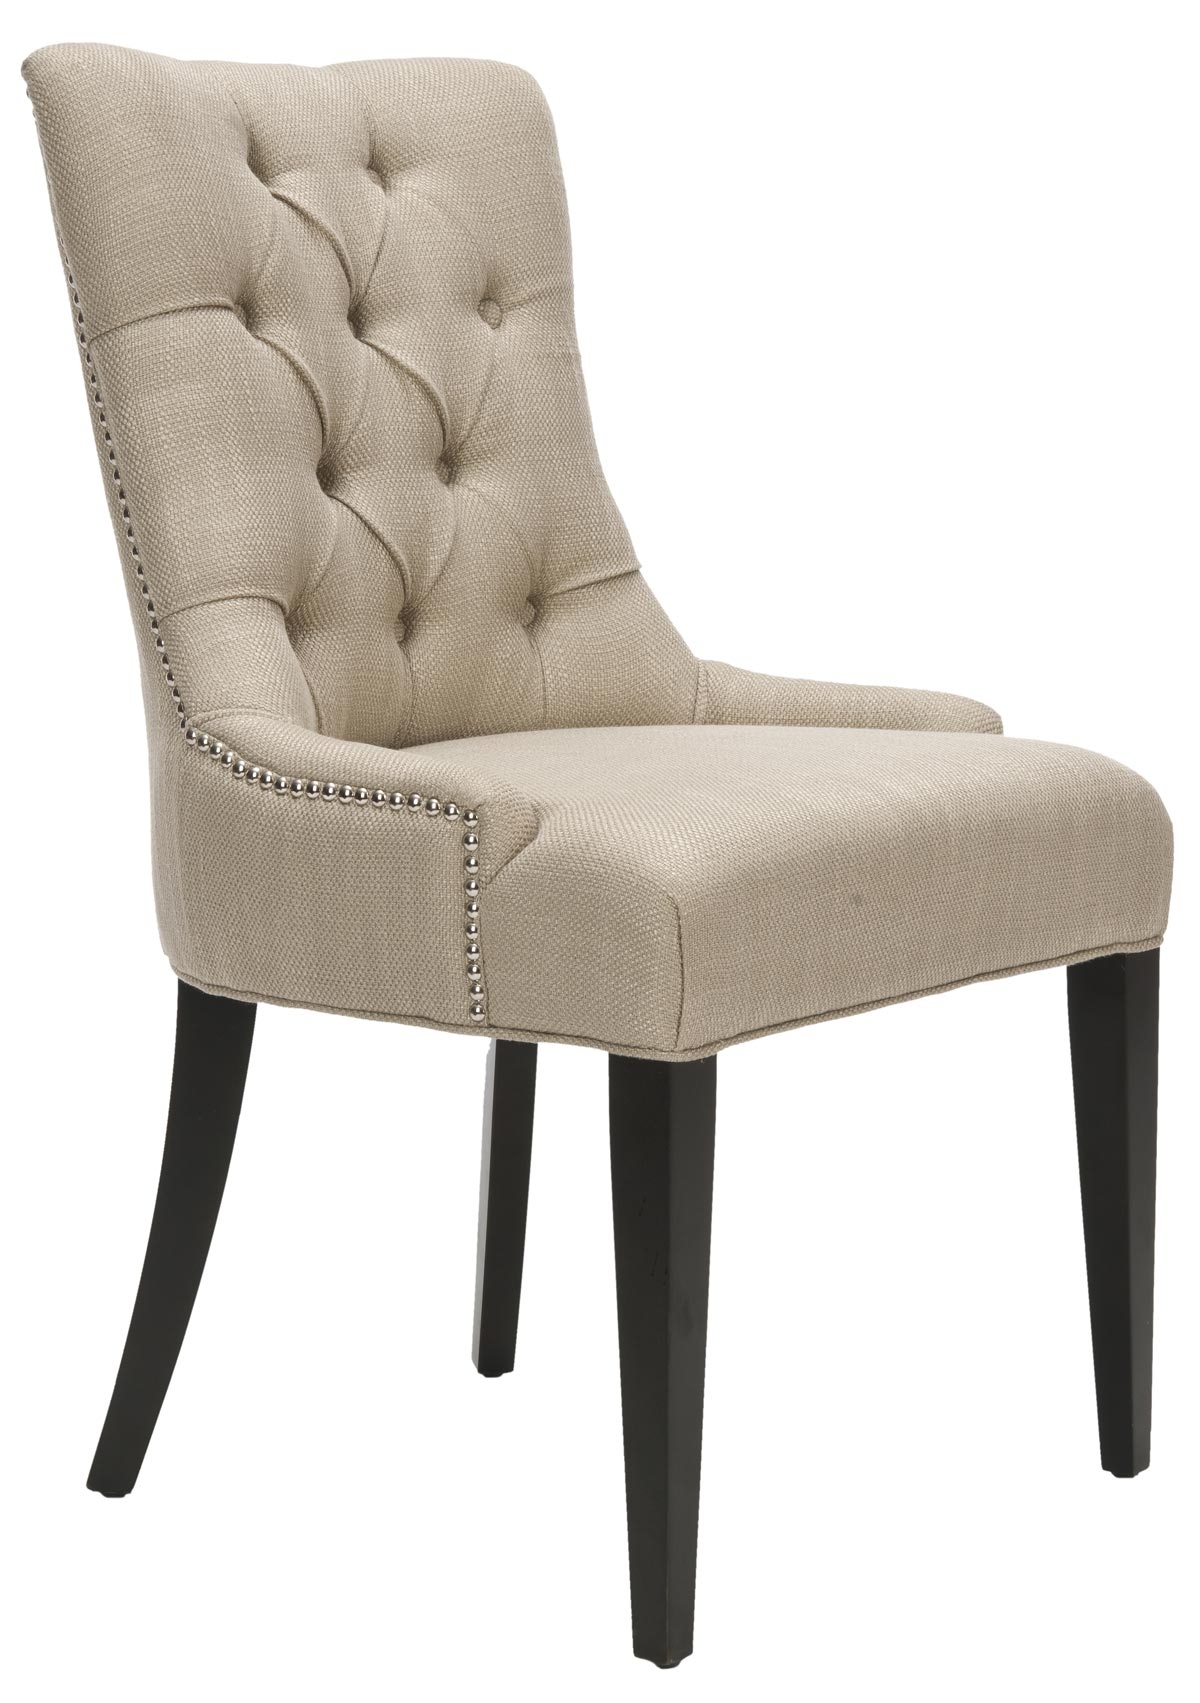 Amanda 19''H Linen Tufted Chair - Nickel Nail Heads - Antique Gold/Espresso - Arlo Home - Image 0